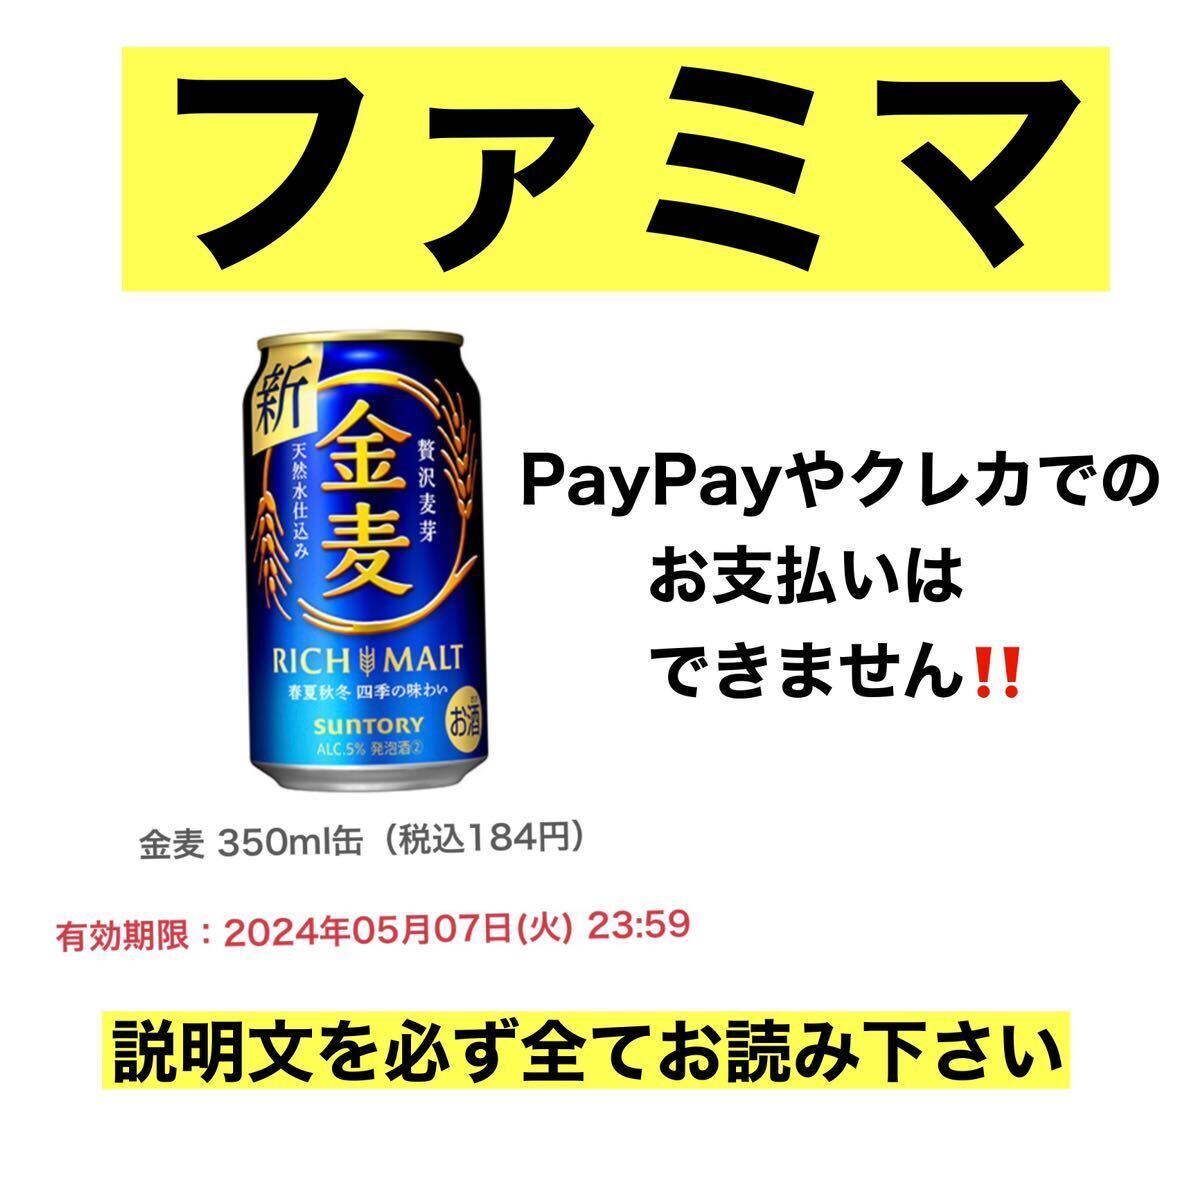 10 pieces Family mart gold wheat 350ml can ( tax included 184 jpy ) free coupon coupon free coupon coupon substitution time limit 5/7 till famimaURL